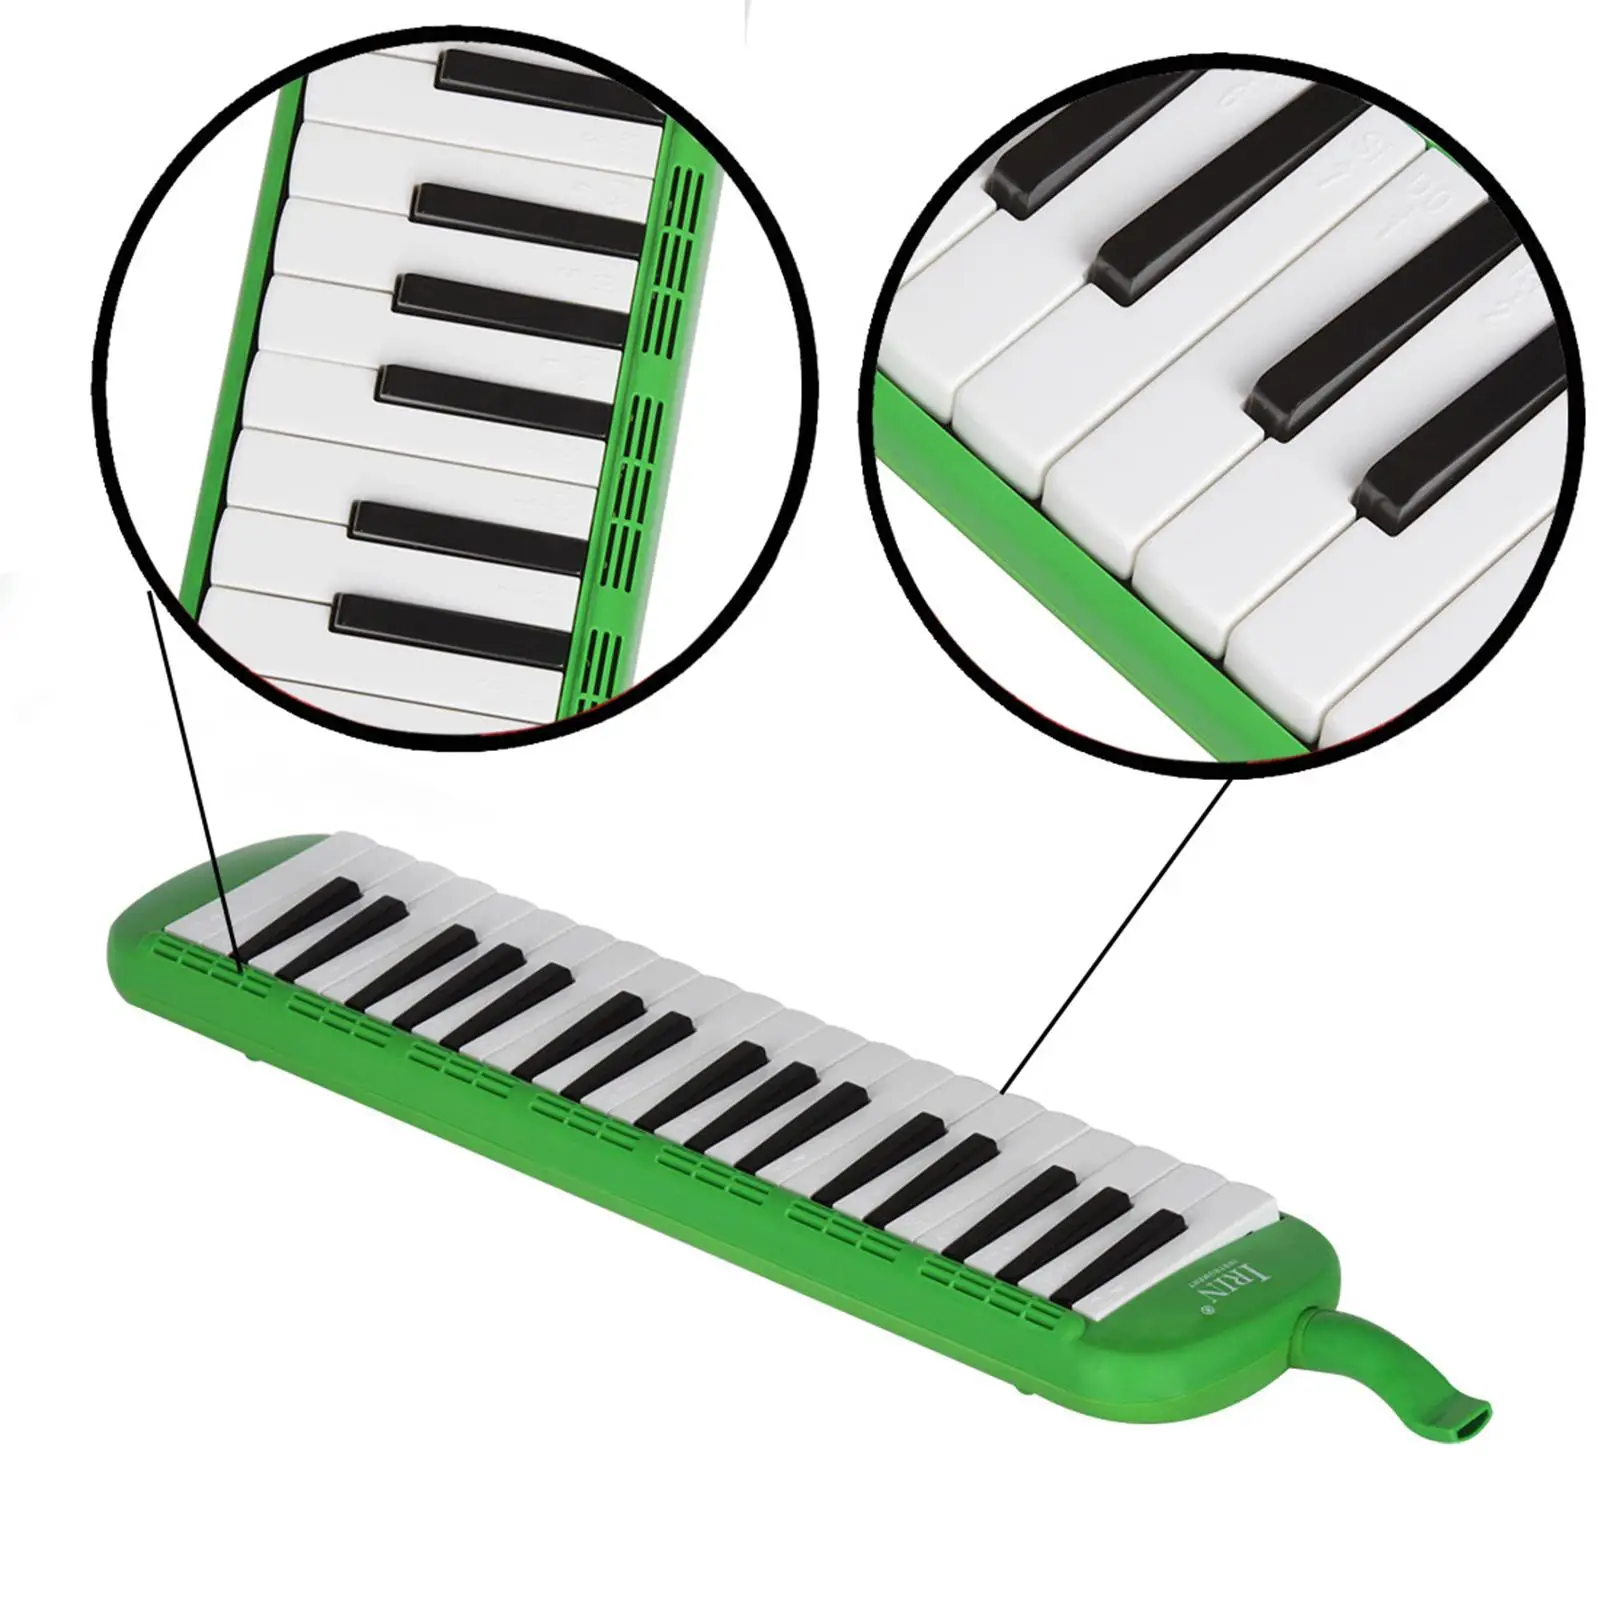 37 Keys Melodica Air Piano Keyboard Quality Sound for Adults Beginners